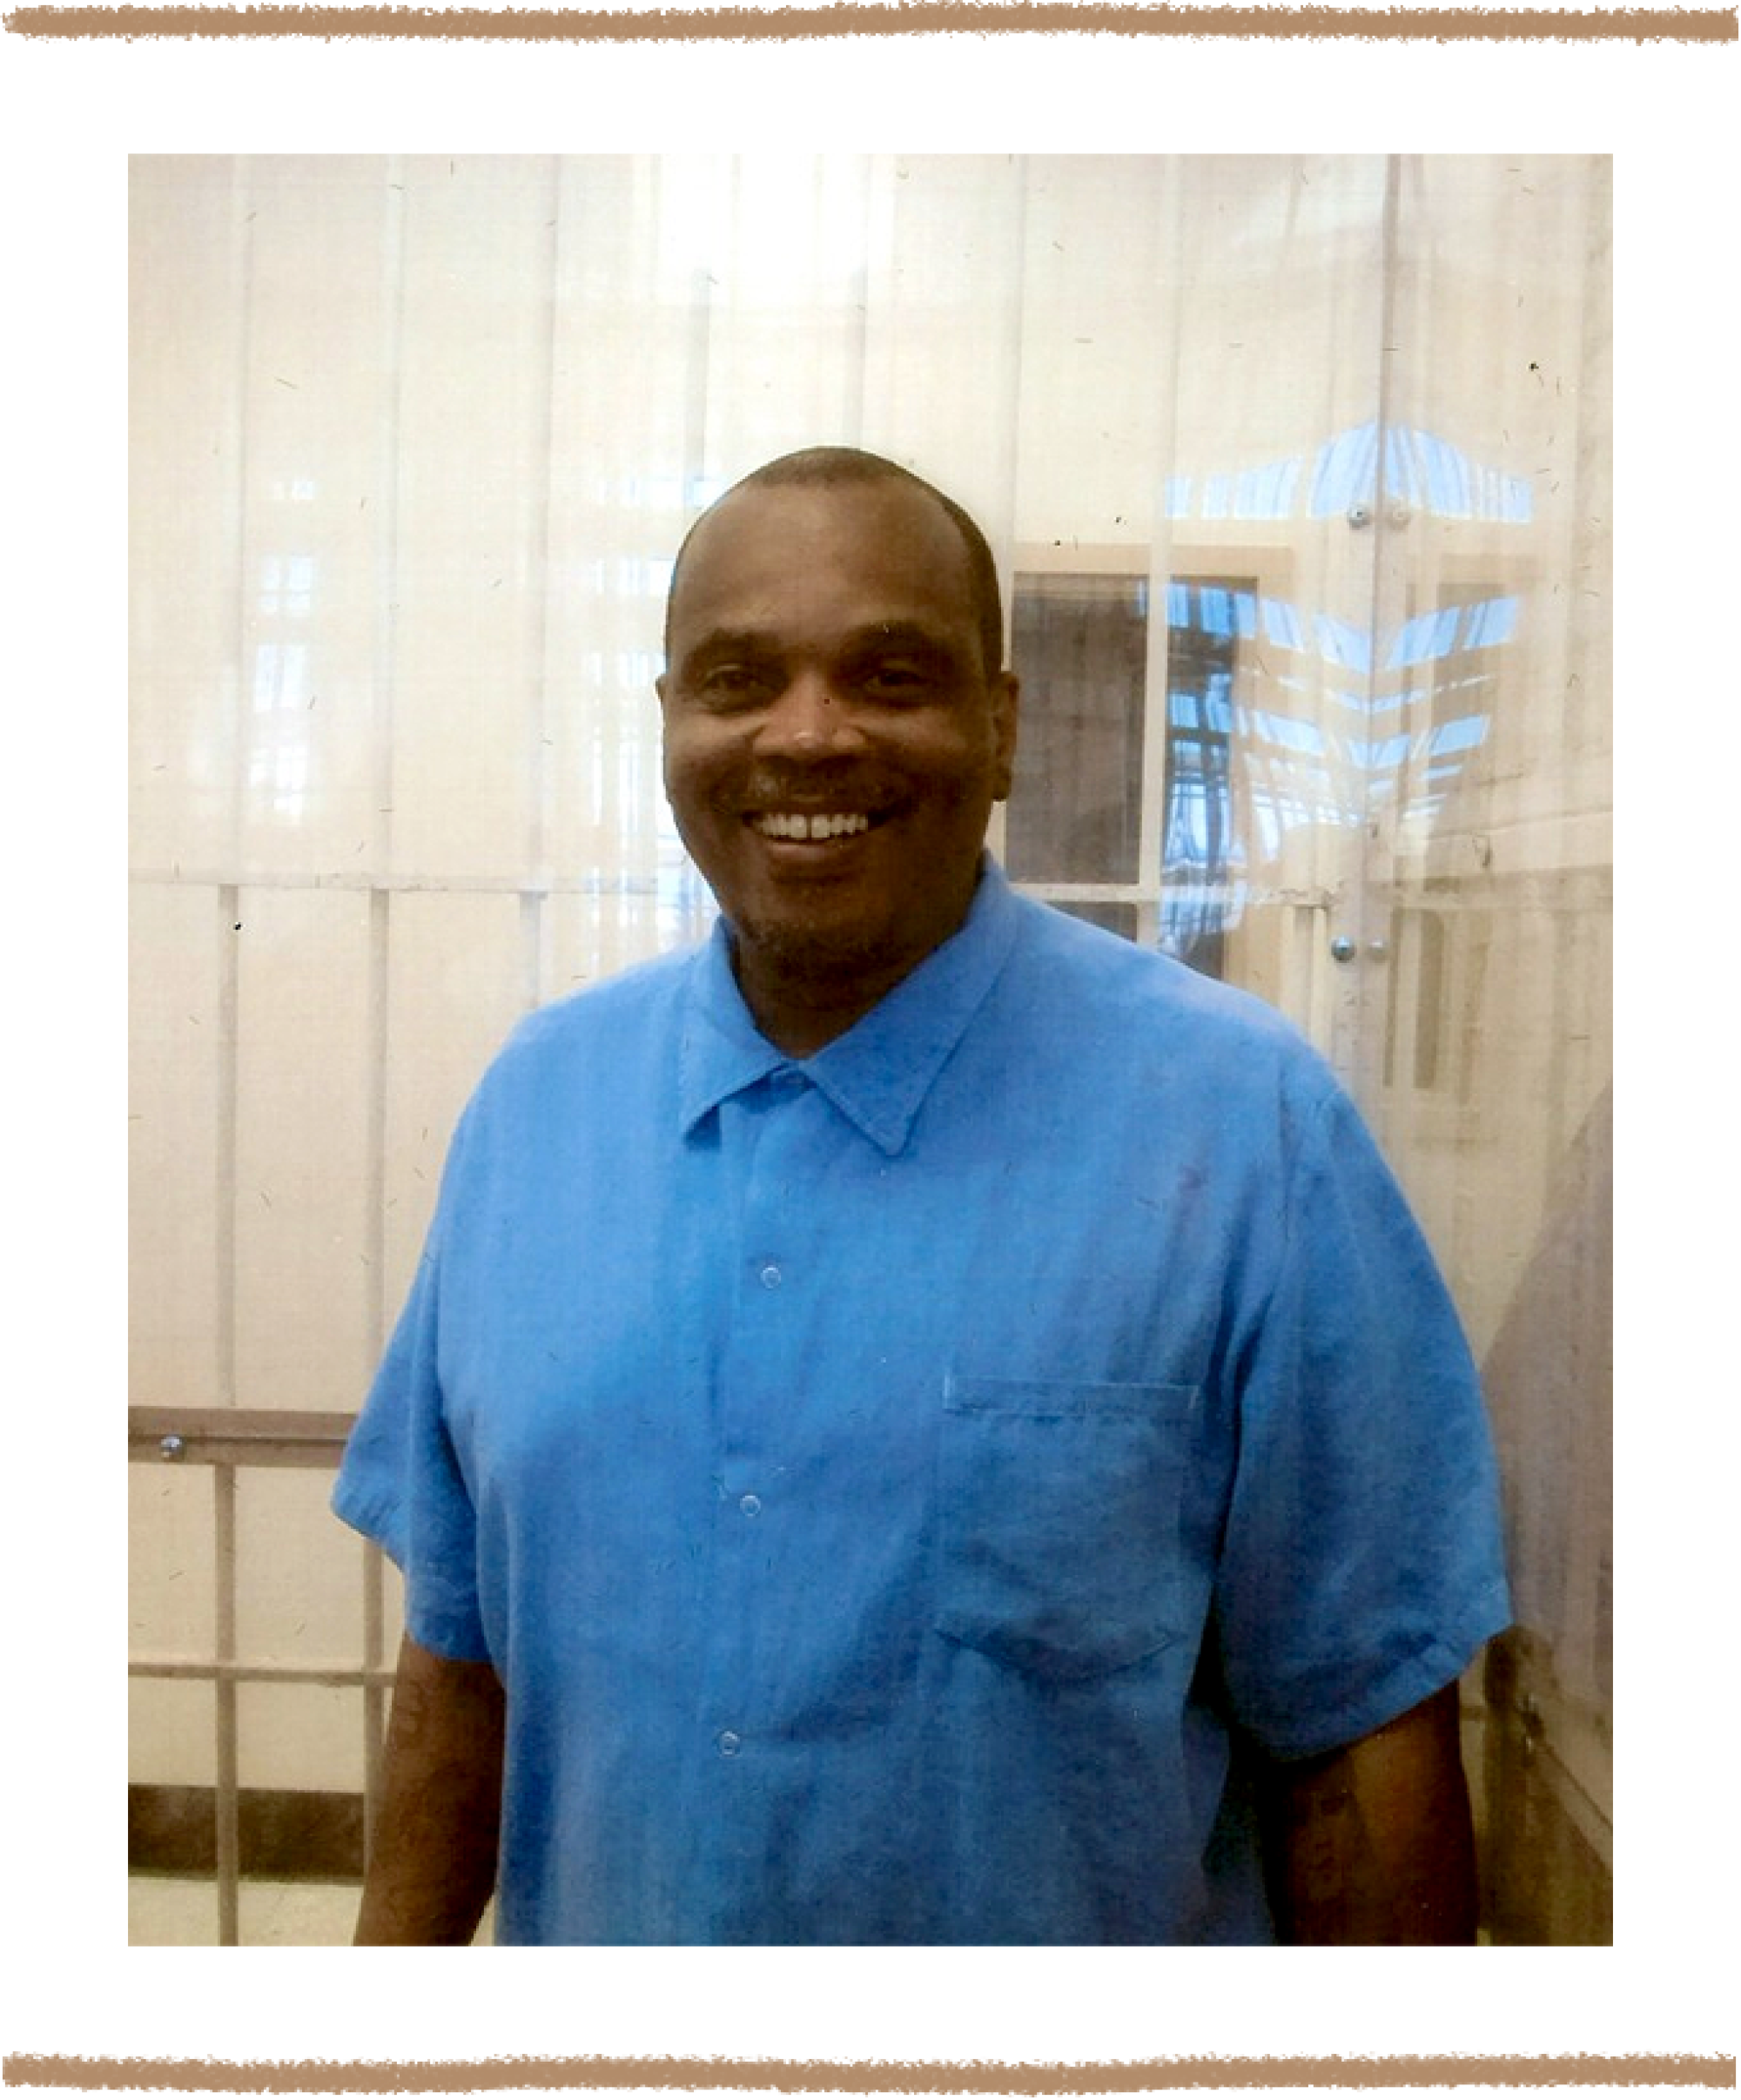 A photo of a man in a blue button-down shirt smiling for a photo in front of white bars